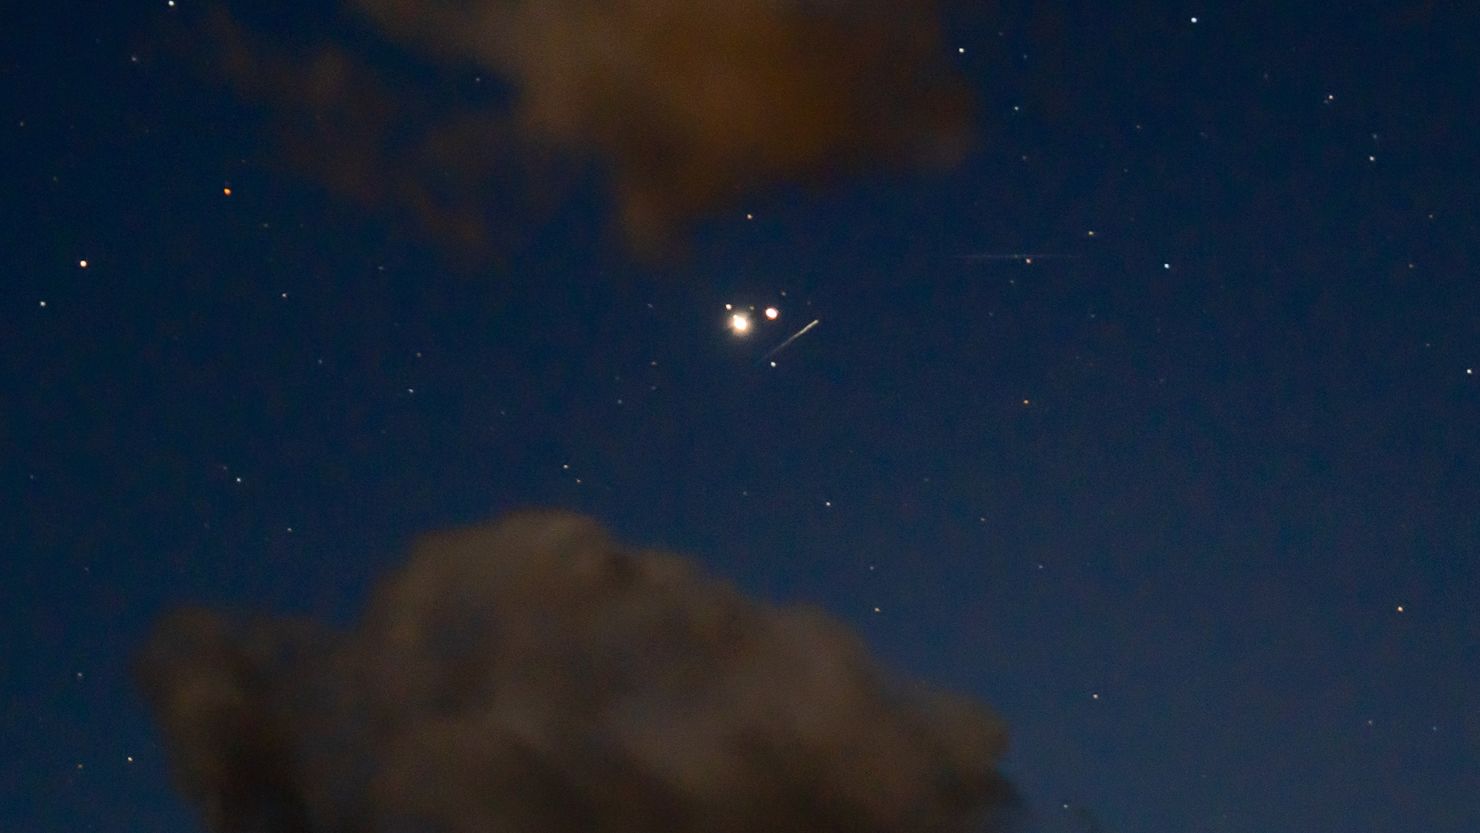 Ursid meteors are seen alongside Jupiter and Saturn's great conjunction in 2020 over Ashland, Oregon. This year, the Ursids will peak on the night of December 21 through the early morning of December 22.